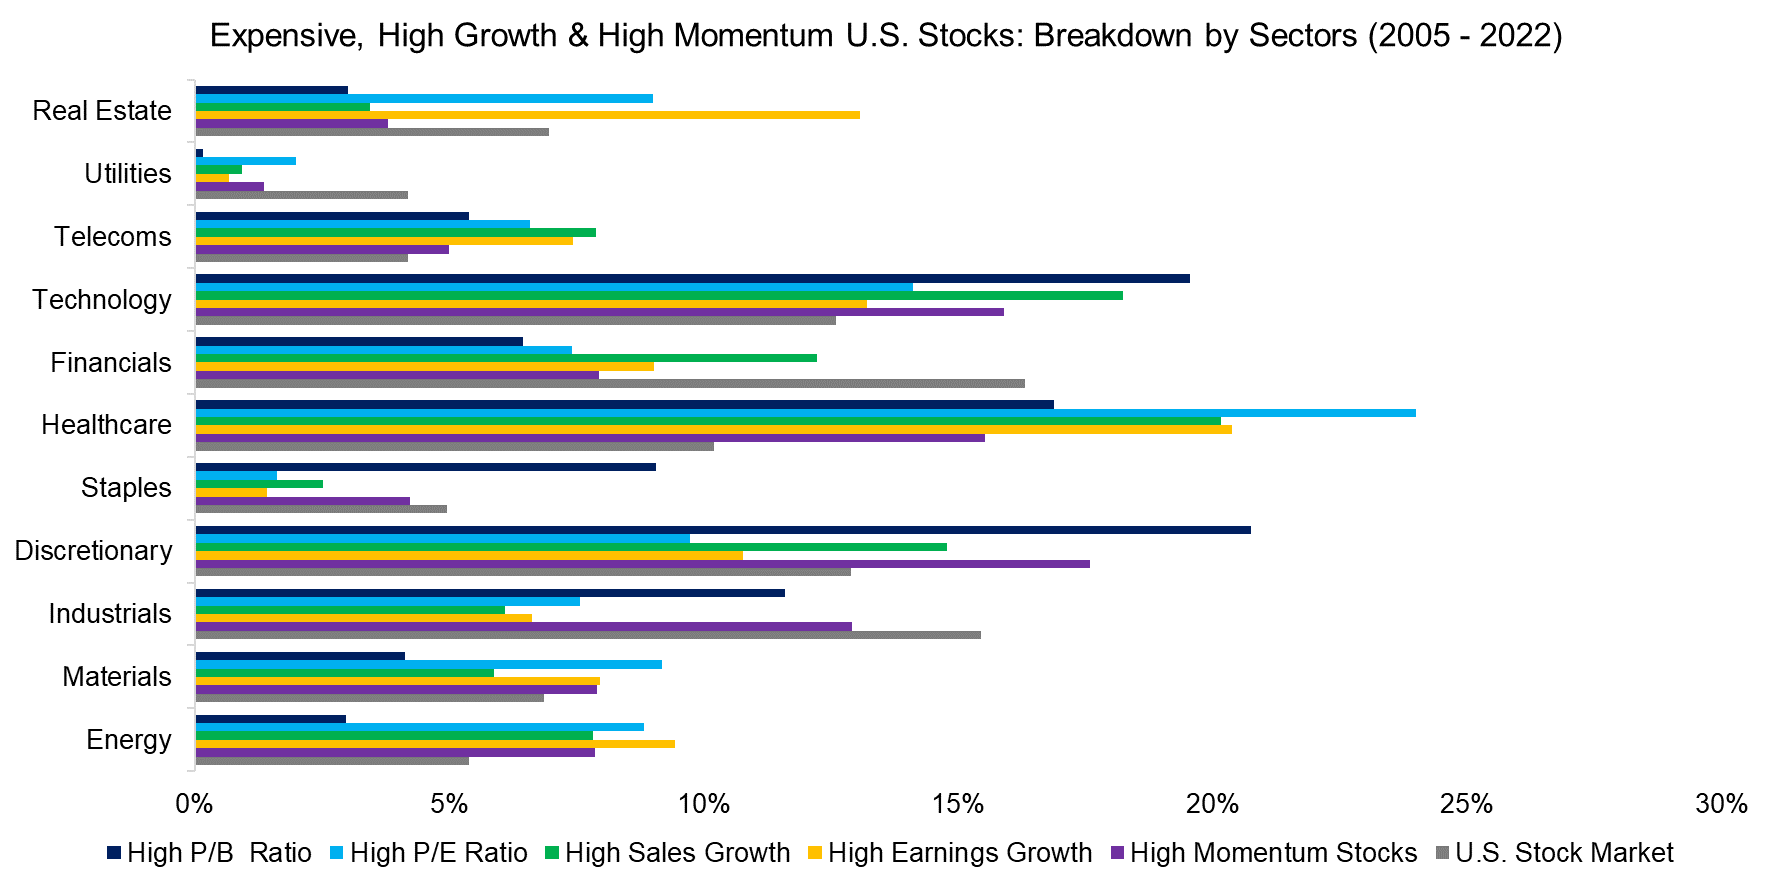 Expensive, High Growth & High Momentum U.S. Stocks Breakdown by Sectors (2005 - 2022)